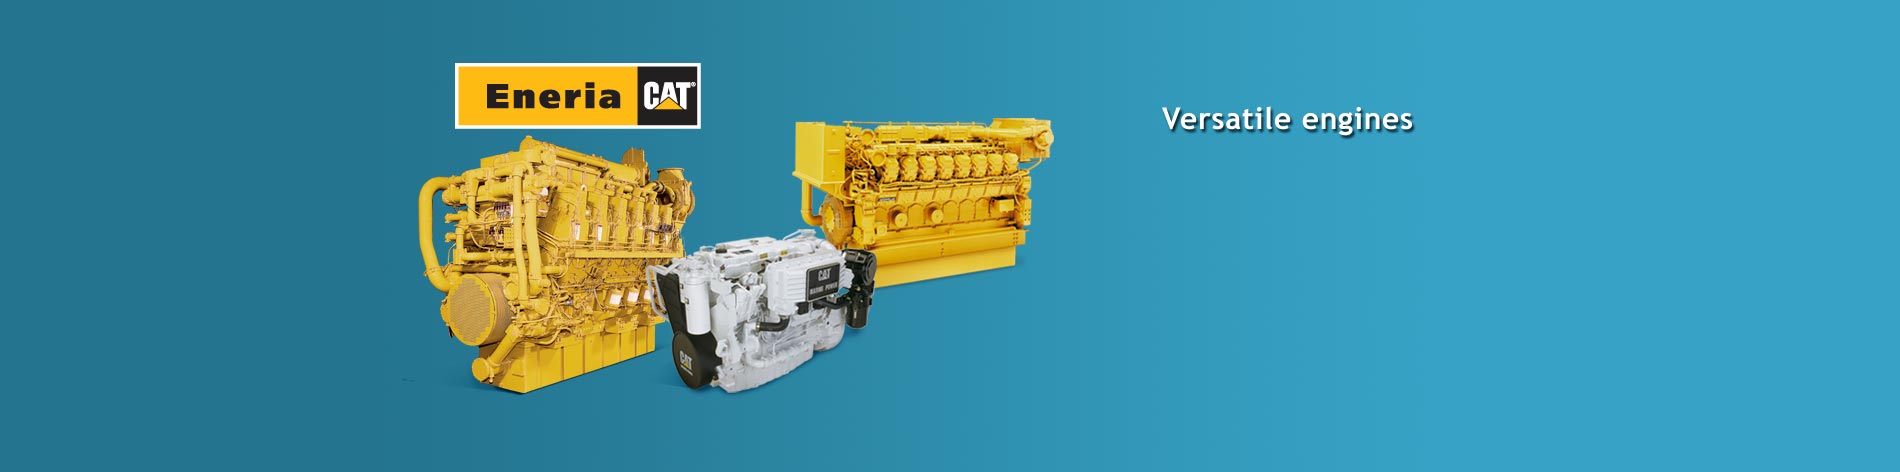 We offer the complete line of marine engines, auxiliary engines, propulsion engines and generator sets. 